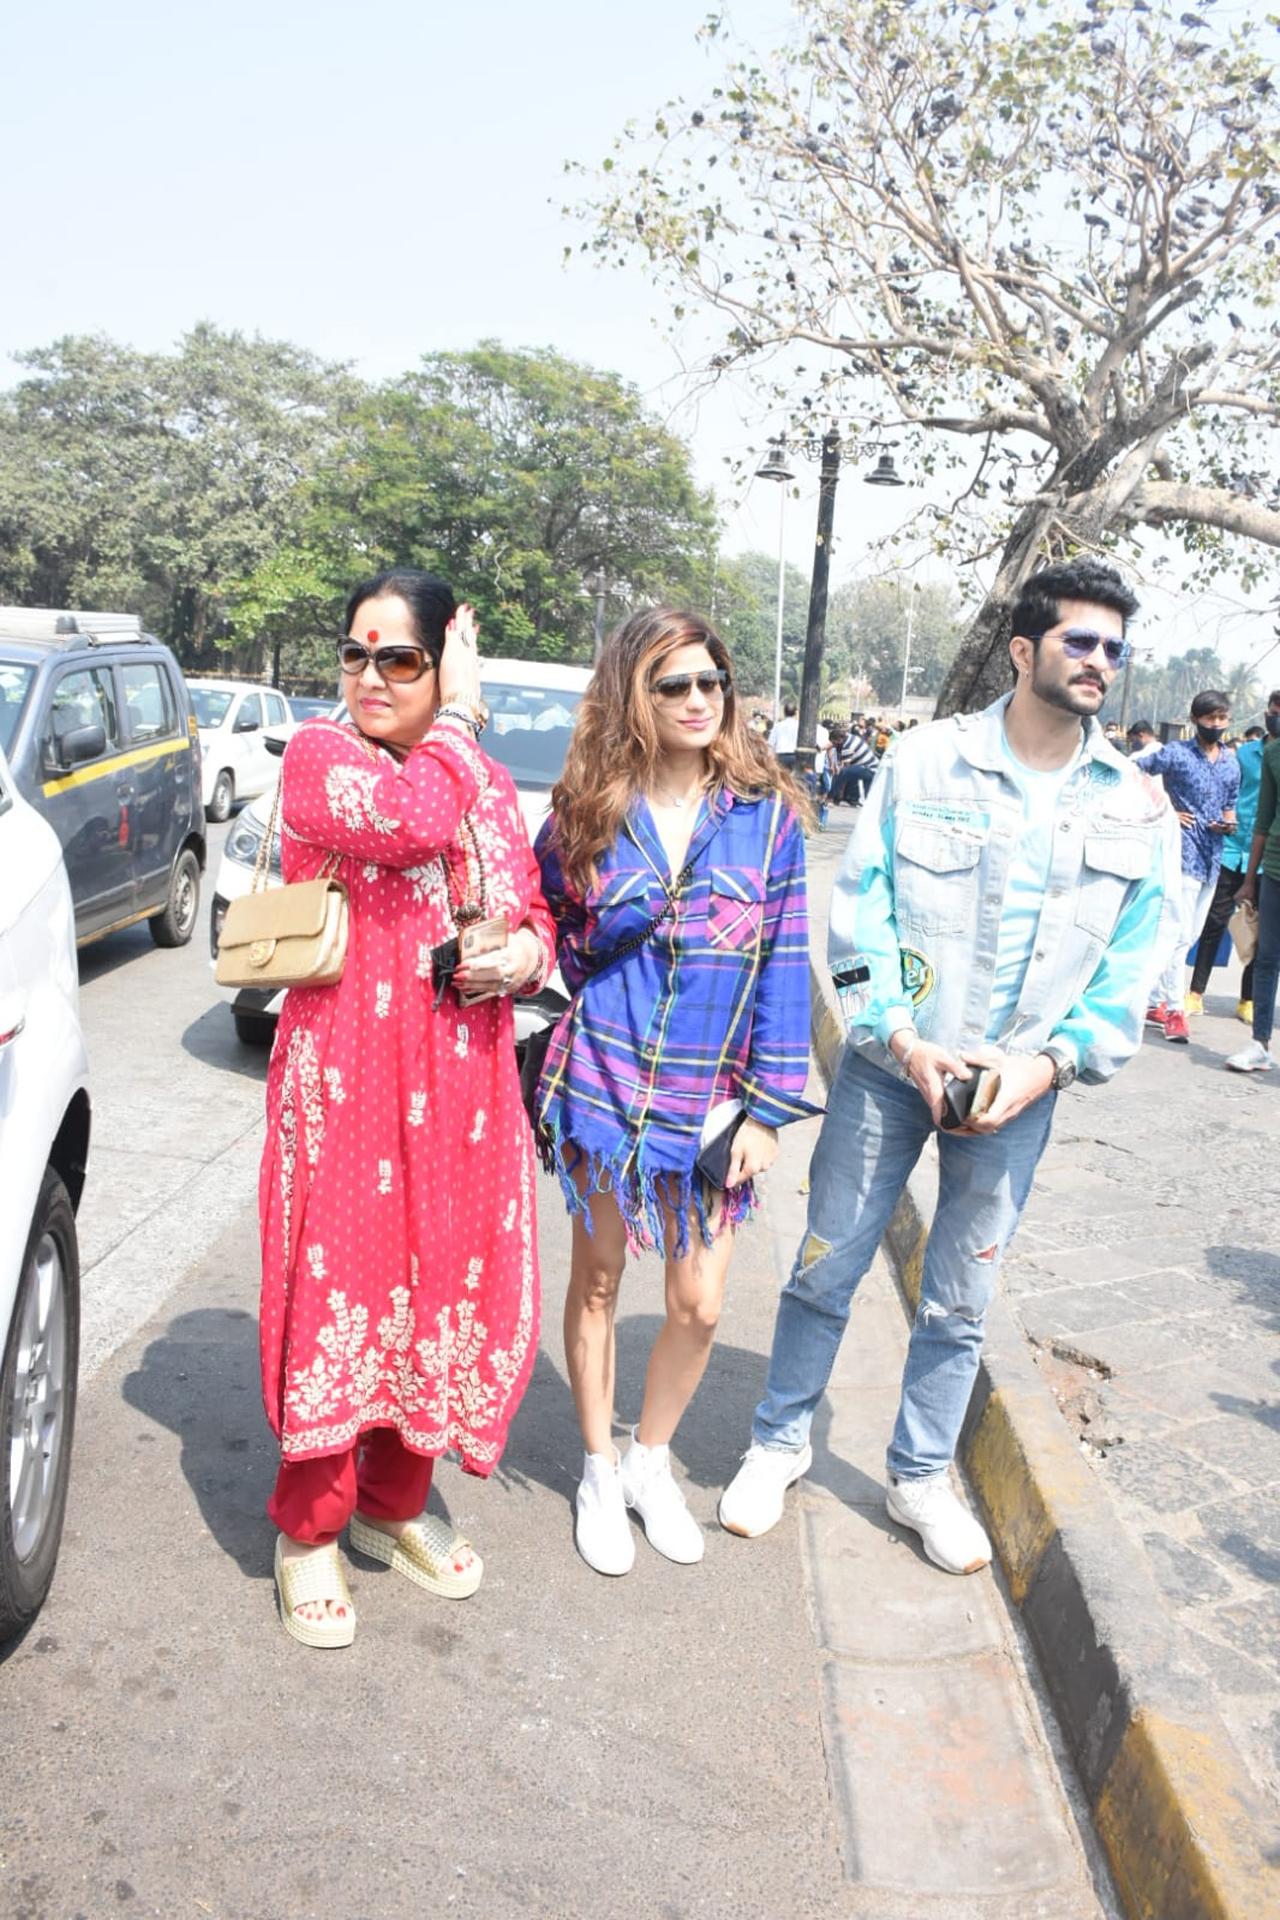 Meanwhile, the Andheri magistrate court has issued summons to actress Shilpa Shetty Kundra, her sister Shamita Shetty and mother Sunanda Shetty for non-repayment of Rs 21 lakhs loan by them as alleged by a businessman.